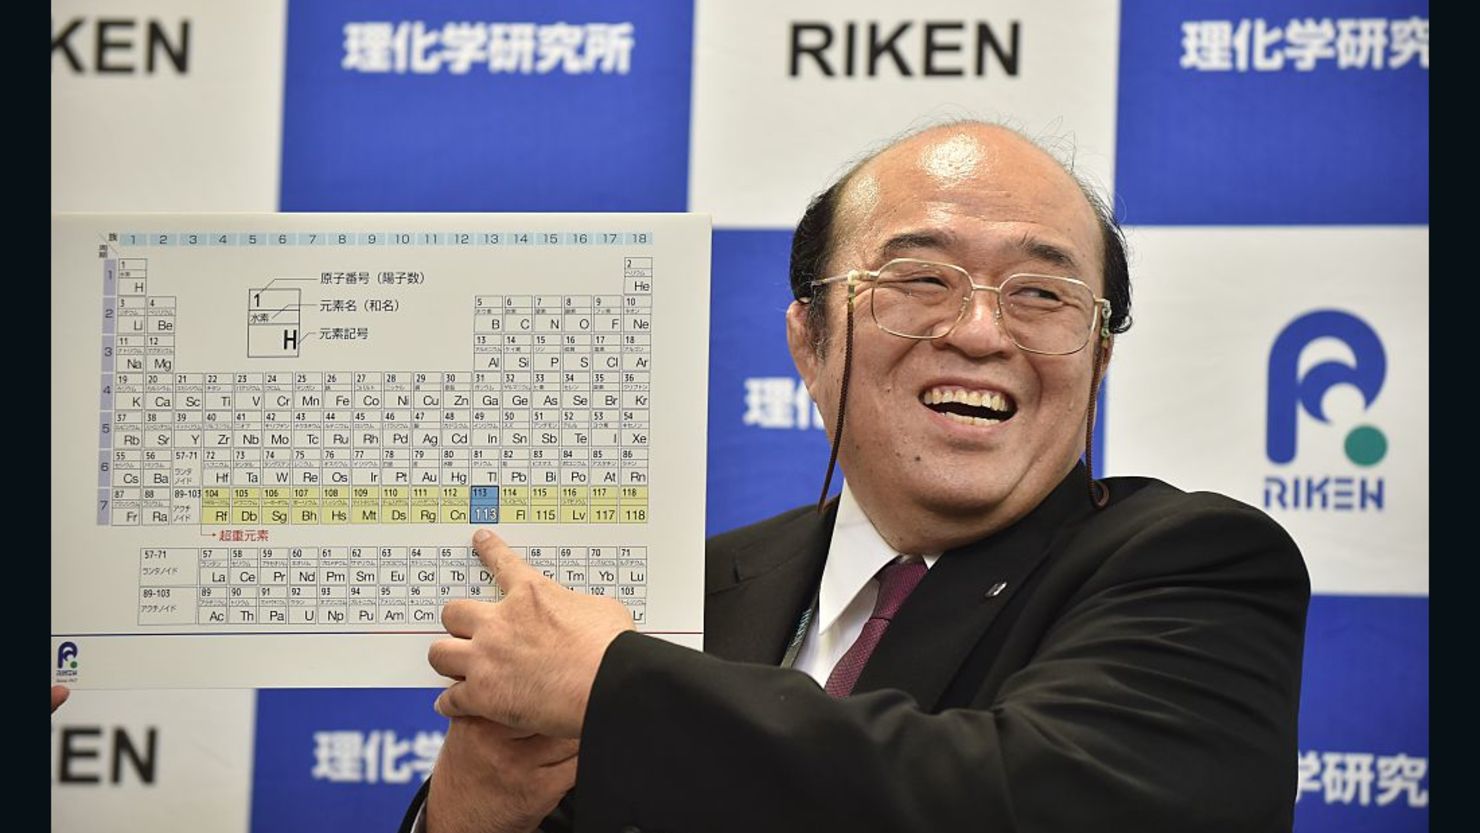 Kosuke Morita smiles as he points to a board displaying the new atomic element 113 during a press conference in Wako, Saitama prefecture, on December 31, 2015. 'Nihonium,' the name for the element, was officially approved Wednesday.